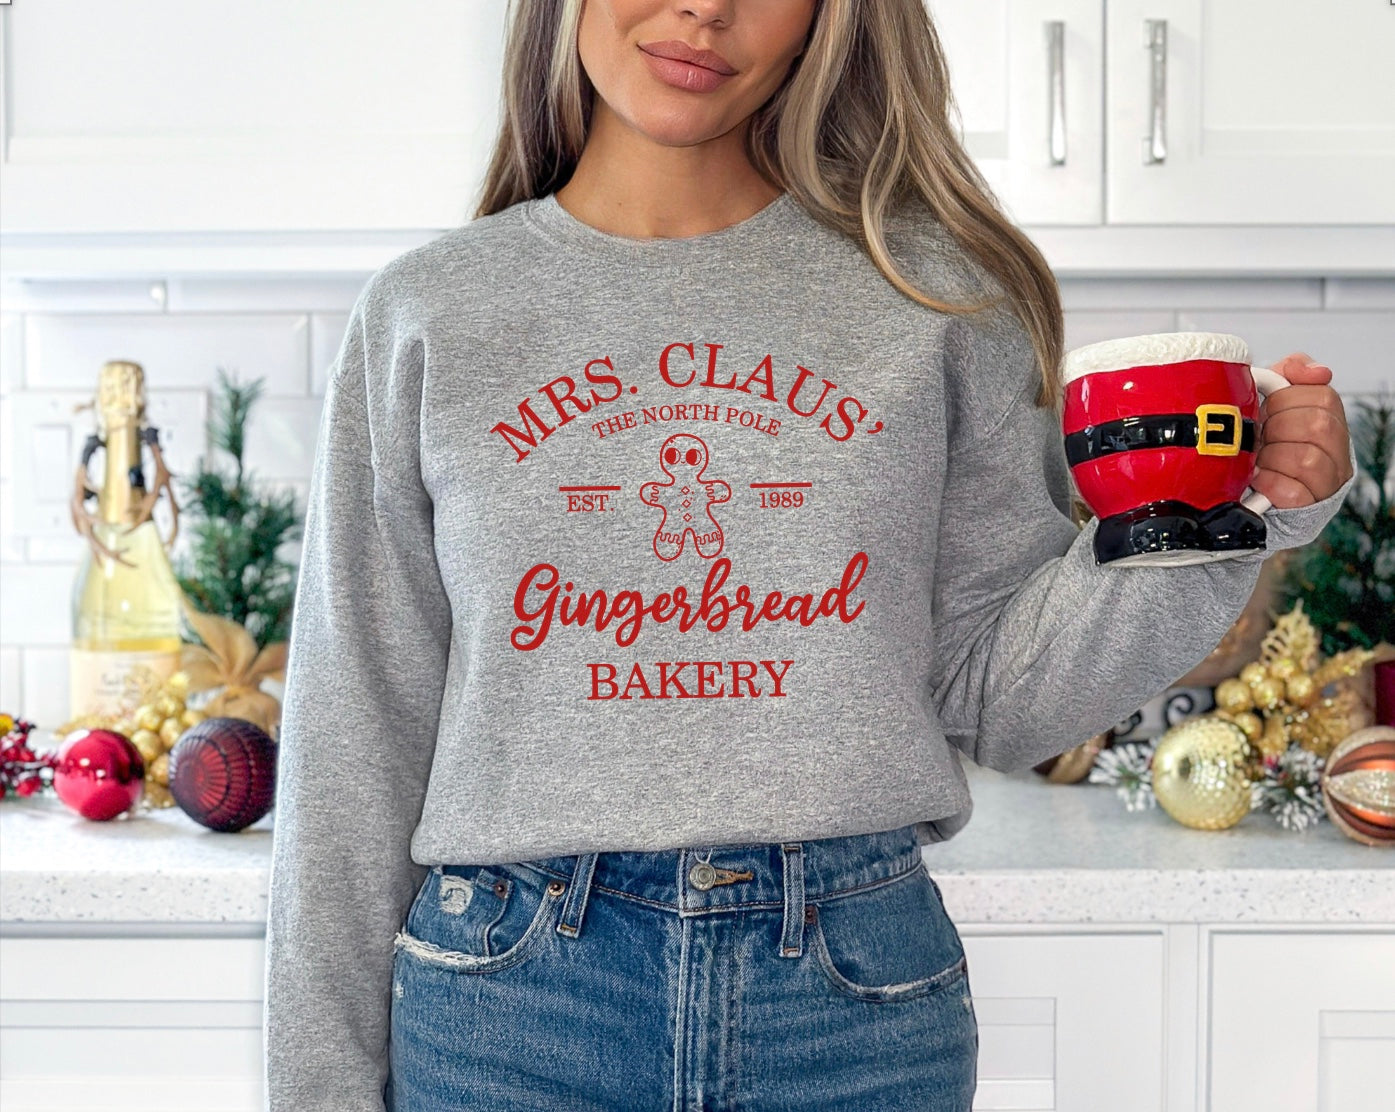 Mrs. Claus' gingerbread bakery unisex crewneck sweatshirt in grey with red graphic